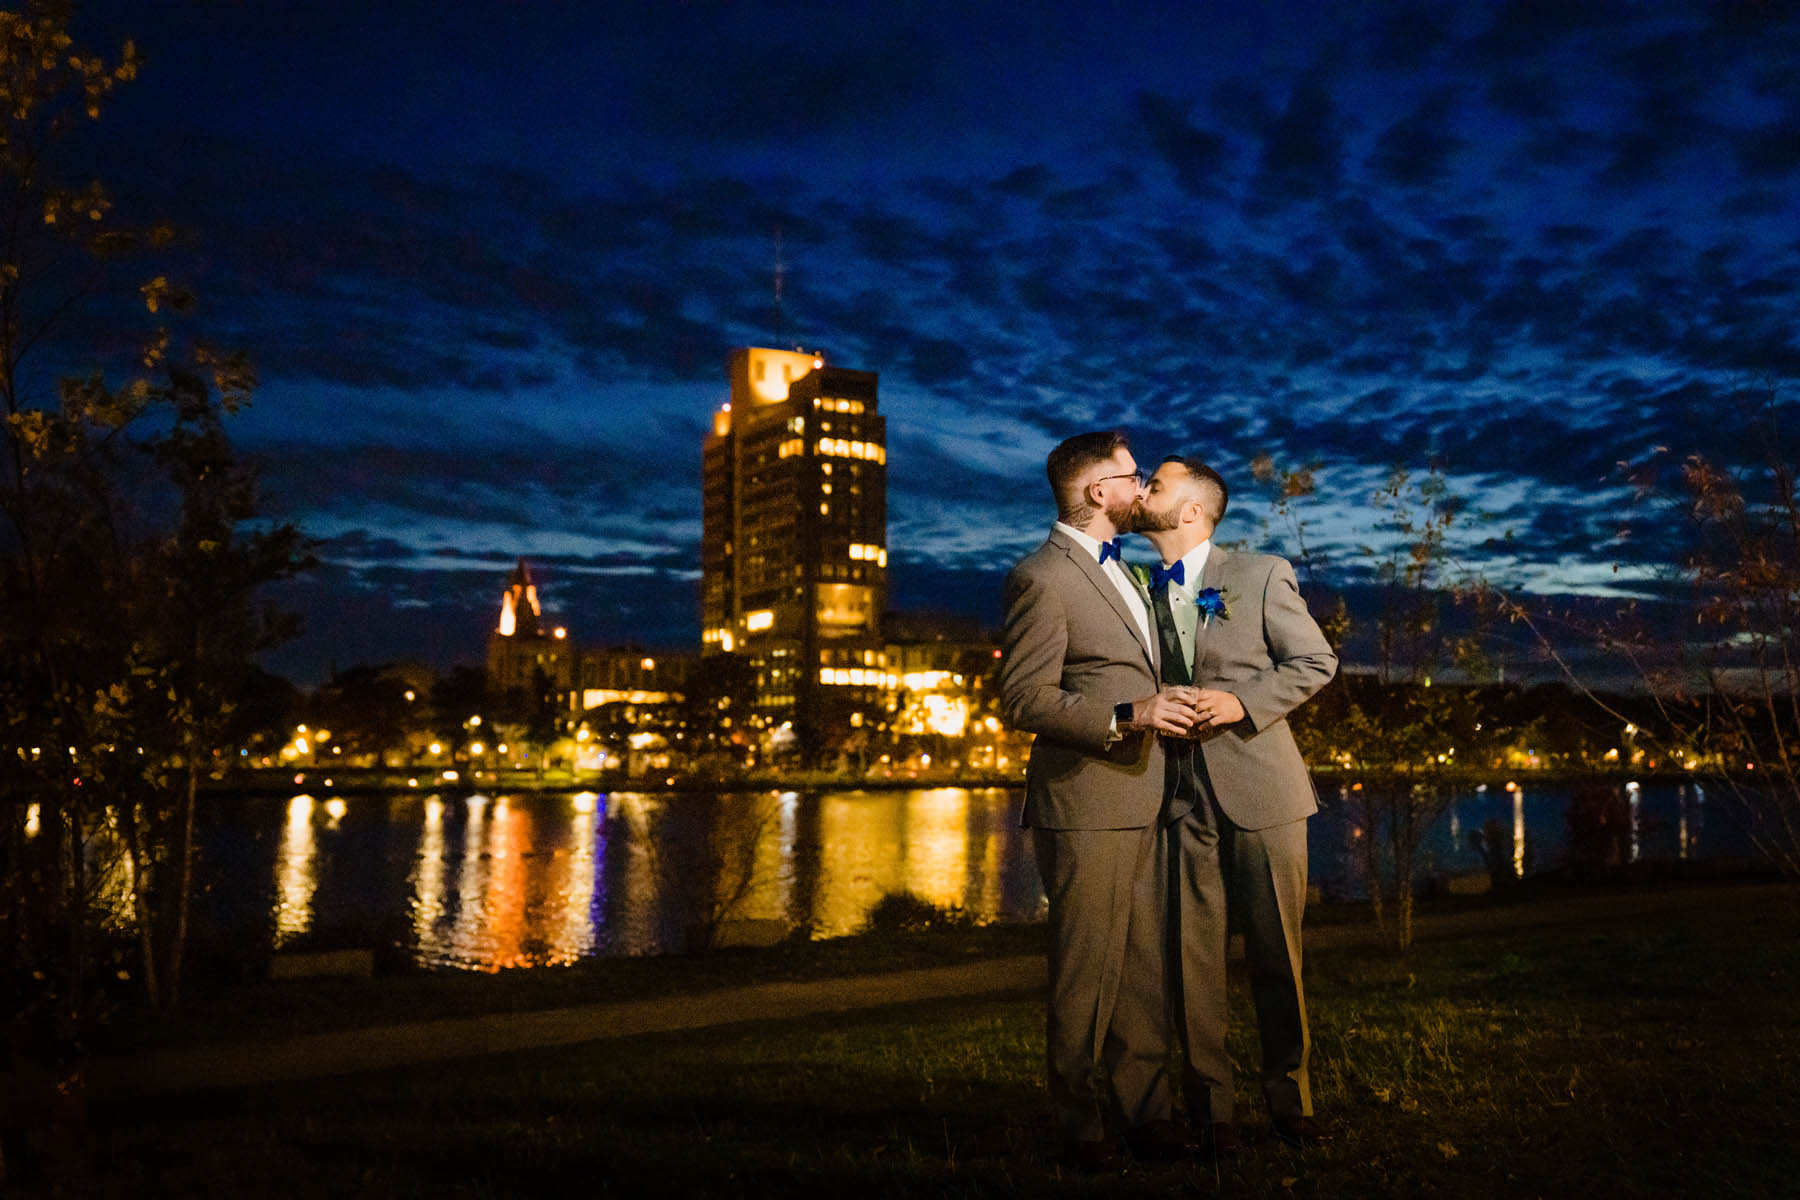 The newlyweds share a kiss in front of the Boston skyline with a royal blue sky behind them.